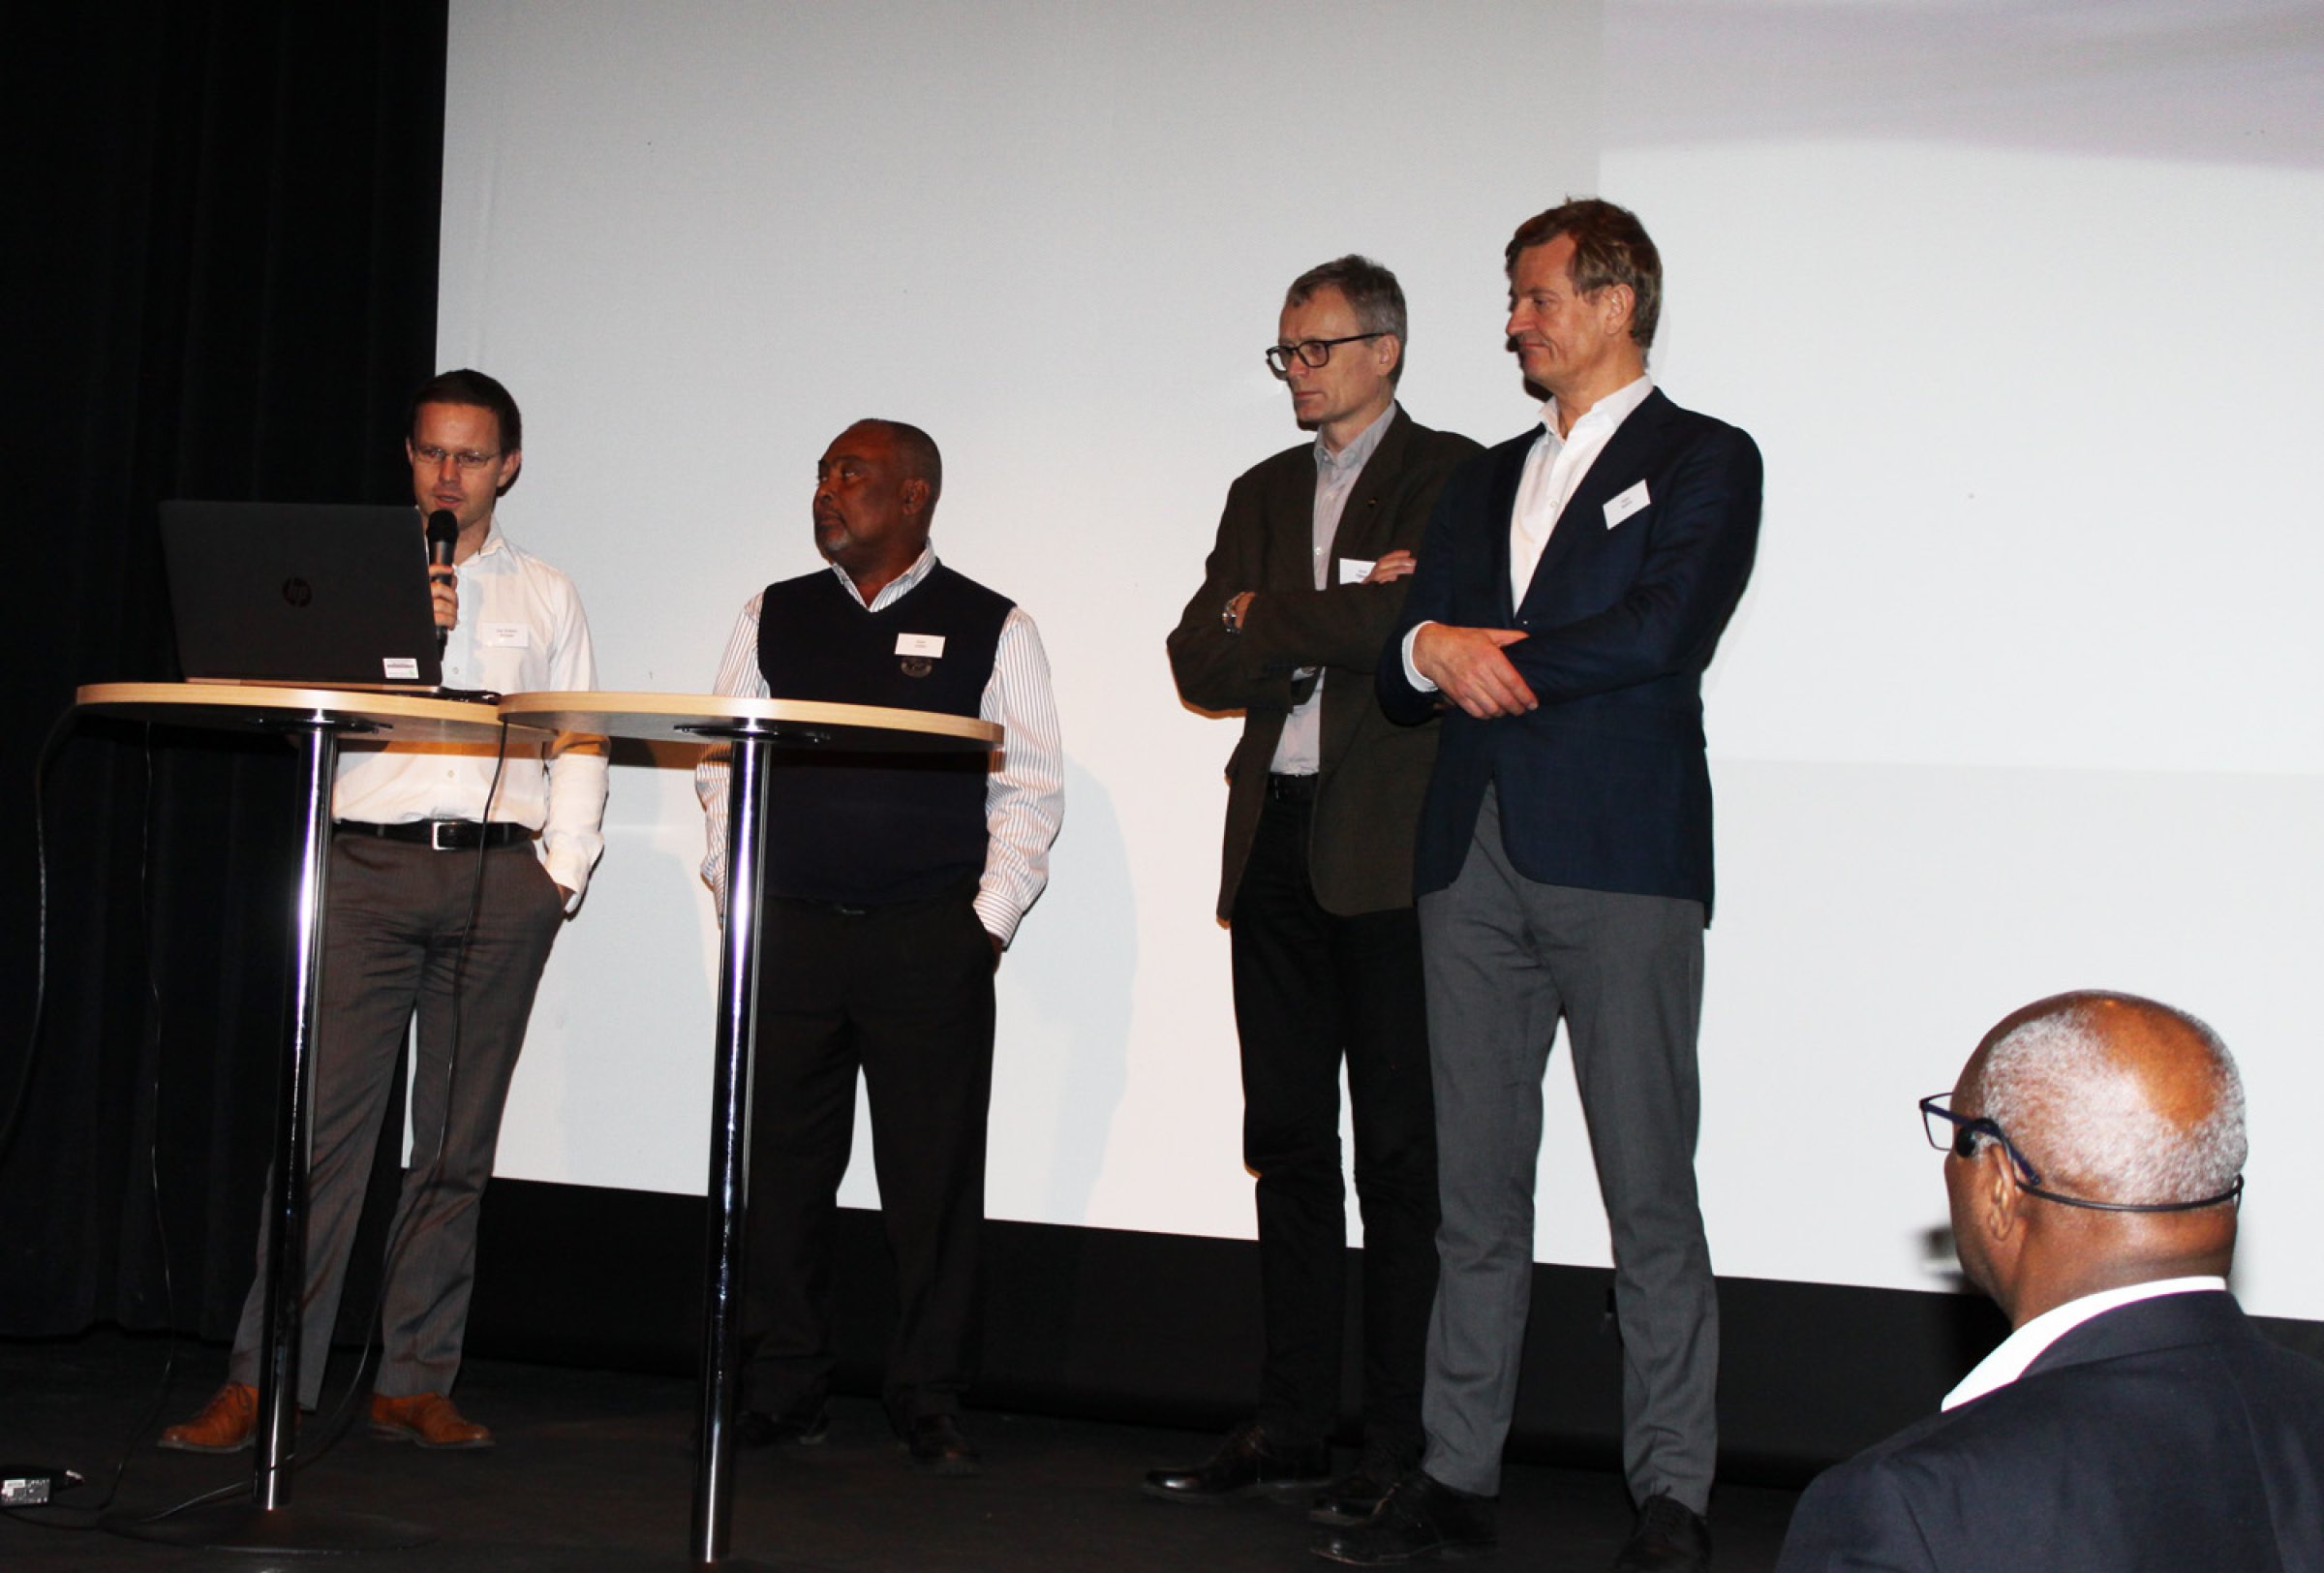 Paneldebate led by Dr Kofitsyo Cudjoe (front right seen from behind)  From left: Executive of Sensacon Iver Kristian Arnesen, The Director of Fish Health from Ghana’s Fishery Commission, Dr Peter Ziddah, Deputy Director of Fish Health at the Norwegian Veterinary Institute, Dr Arne Flåøyen and Consultant from the Advisory office of NORAD and NORFUND, Mr Peter Molthe.